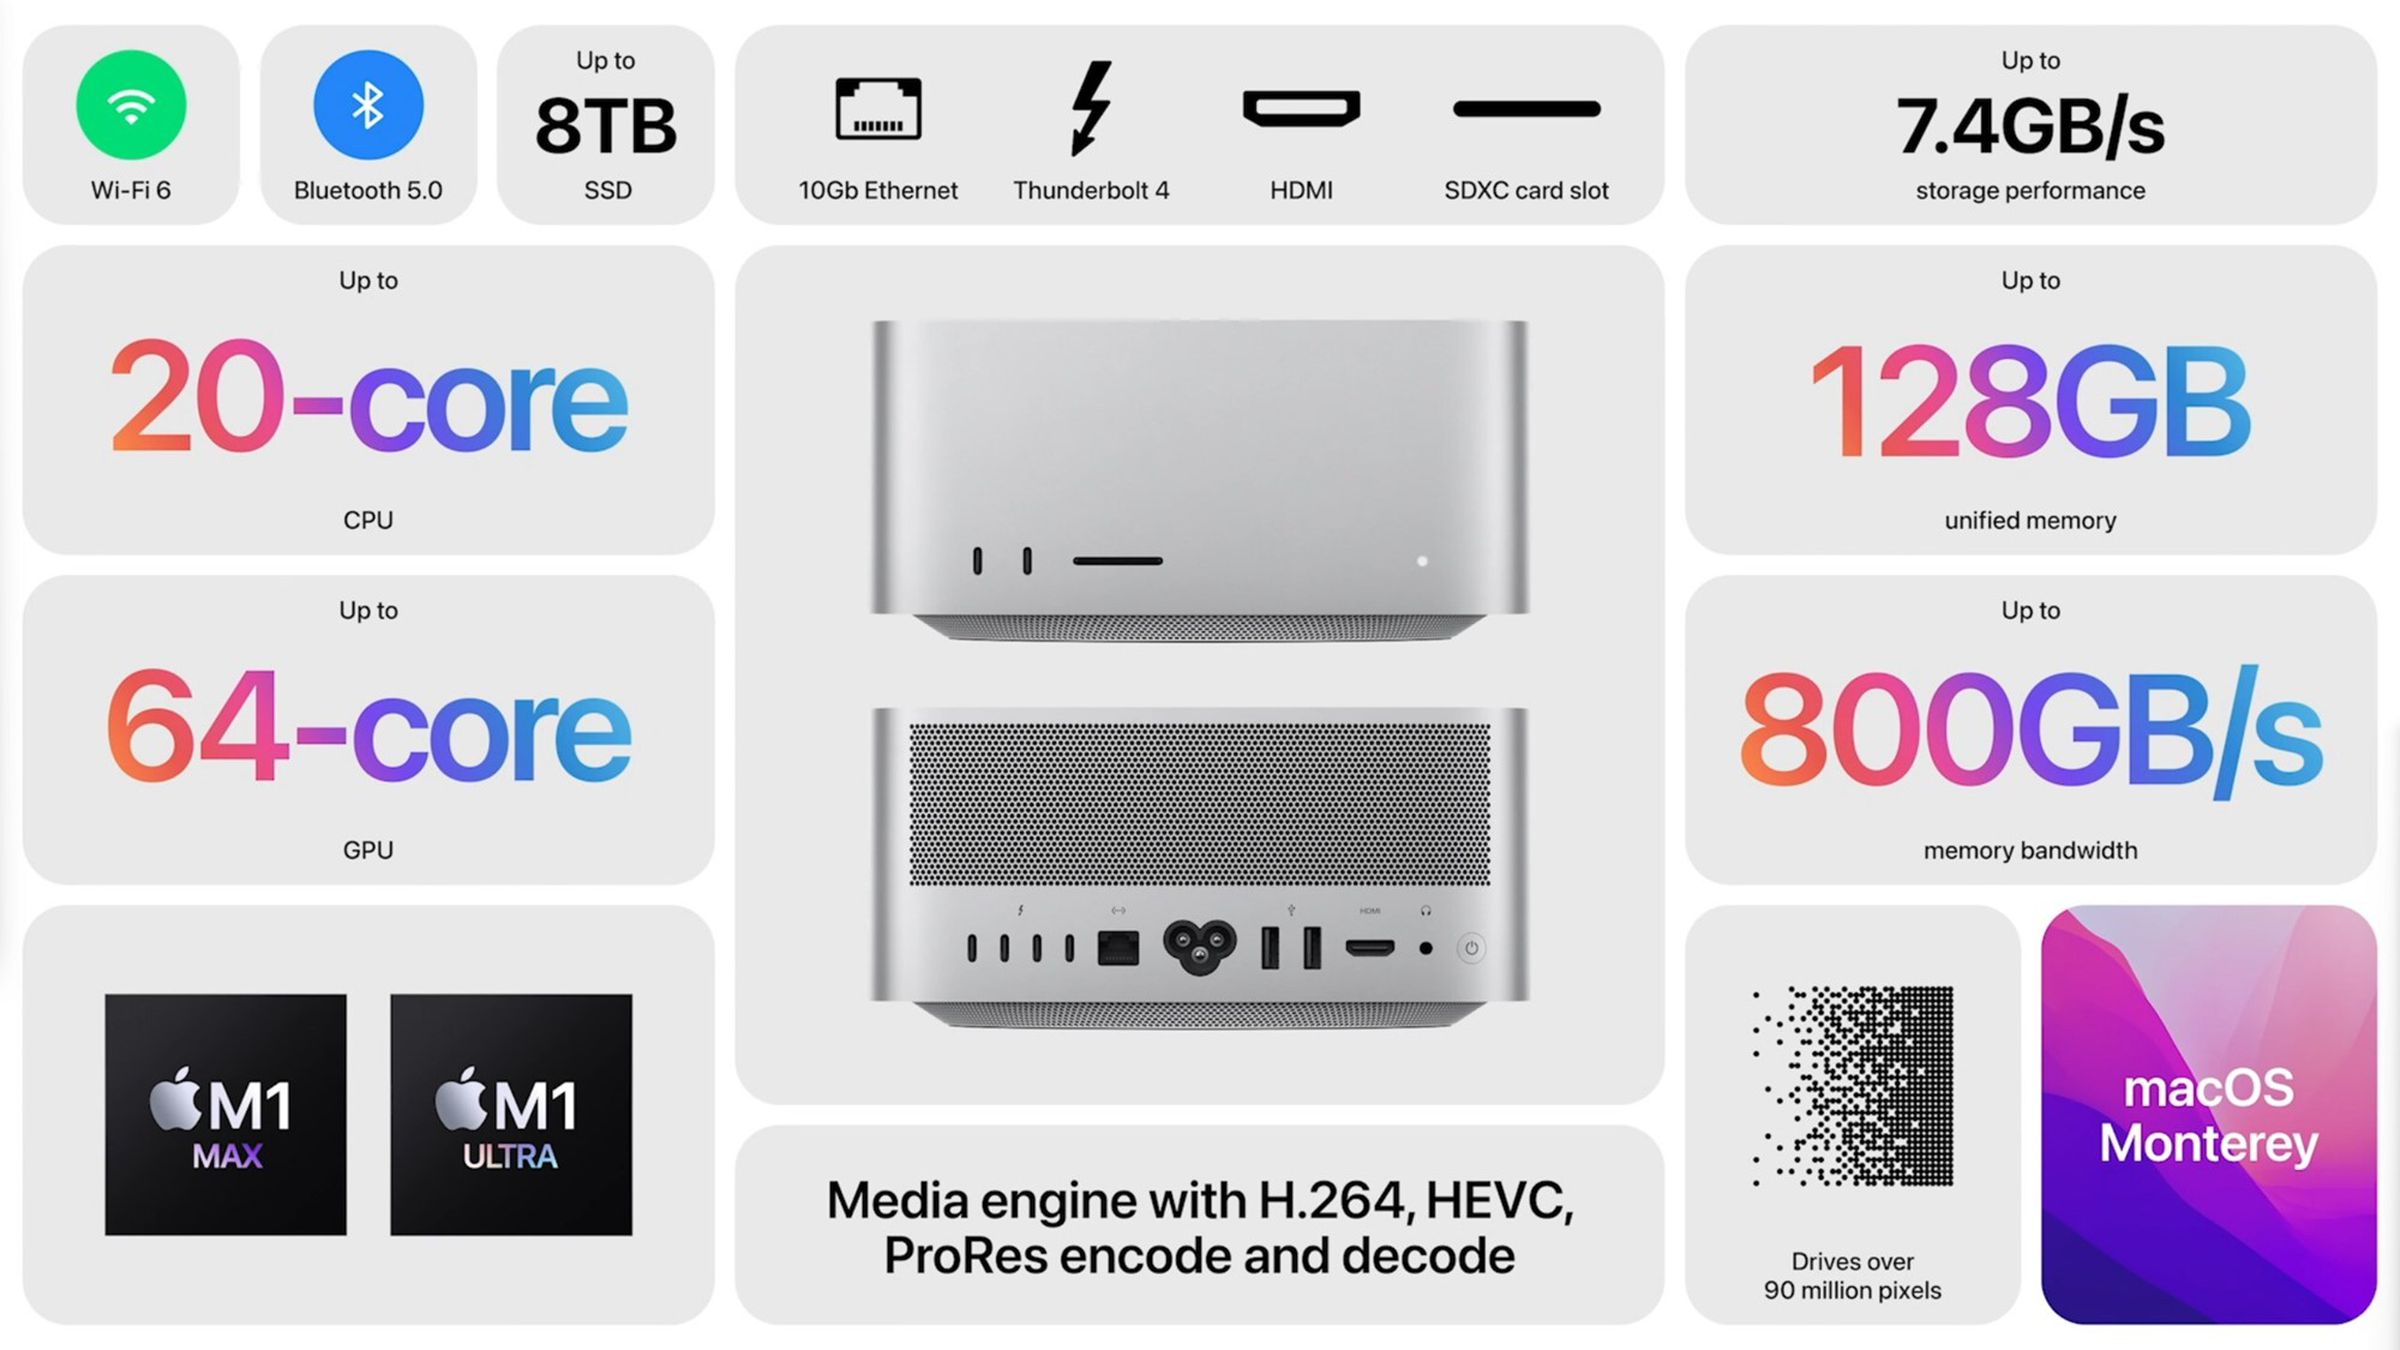 Here, have some odds and ends from Apple’s presentation.